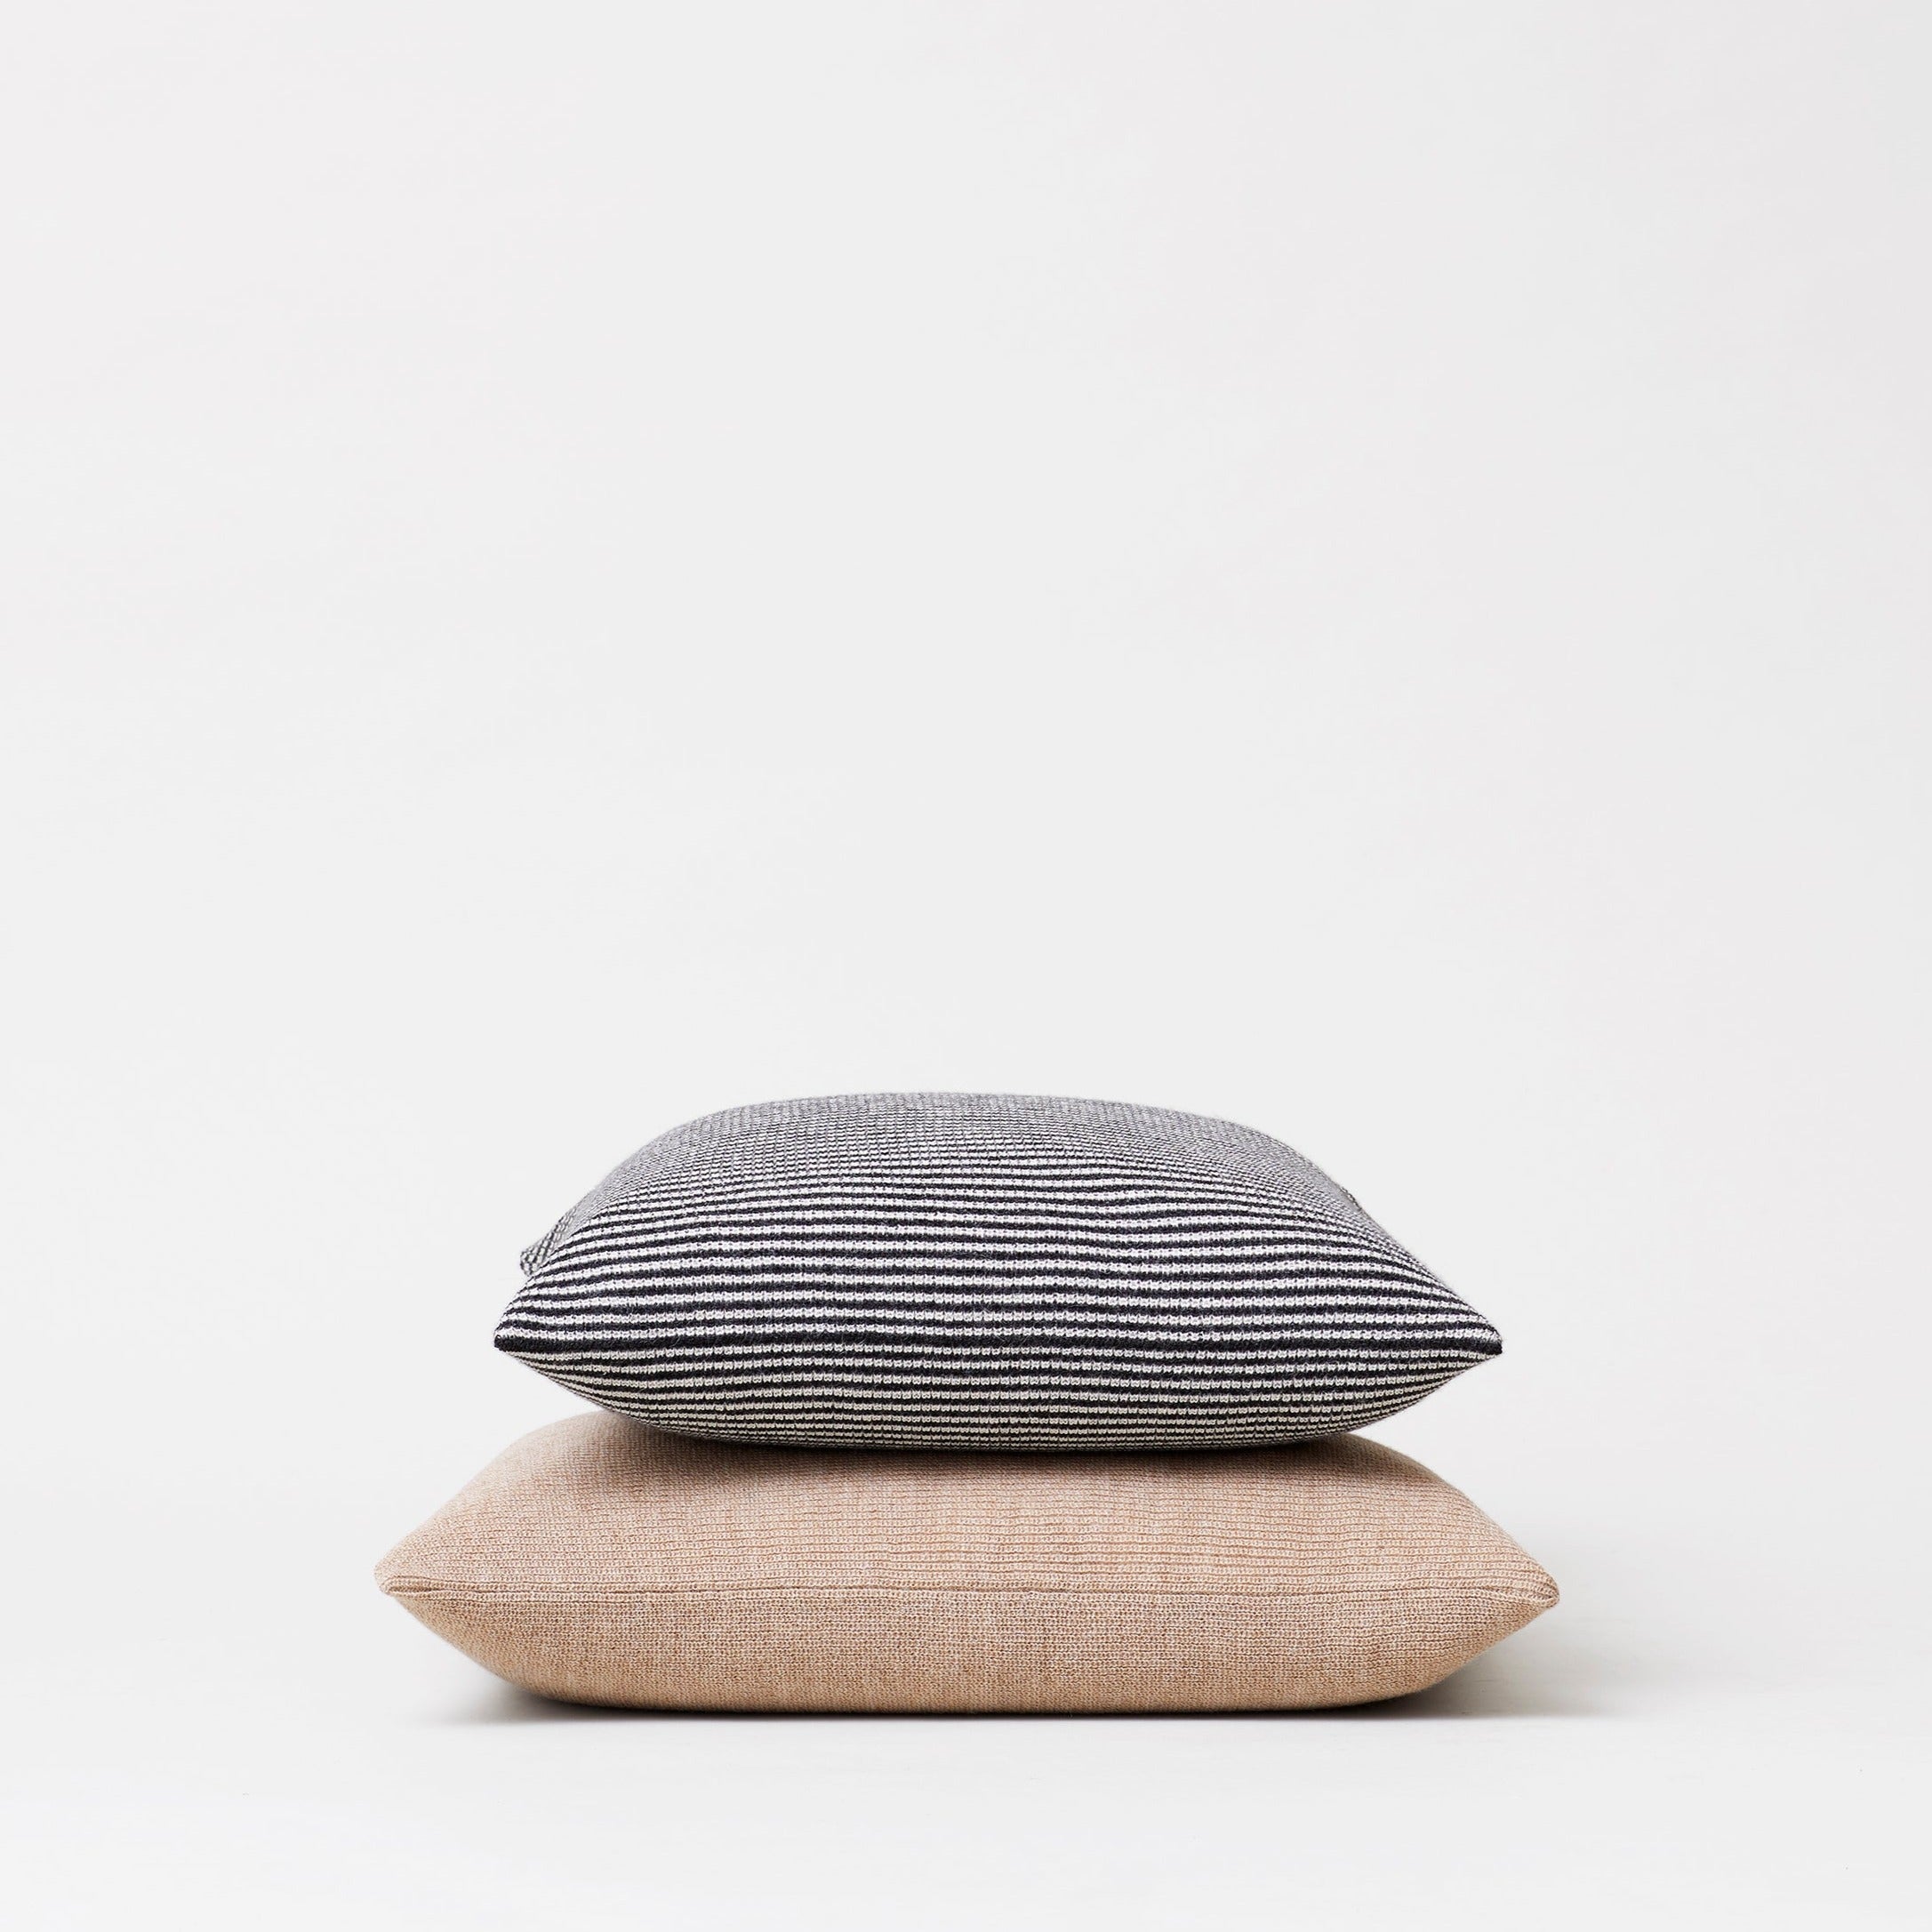 AYMARA Cushion Covers two pillows-dark grey striped and light brown colour